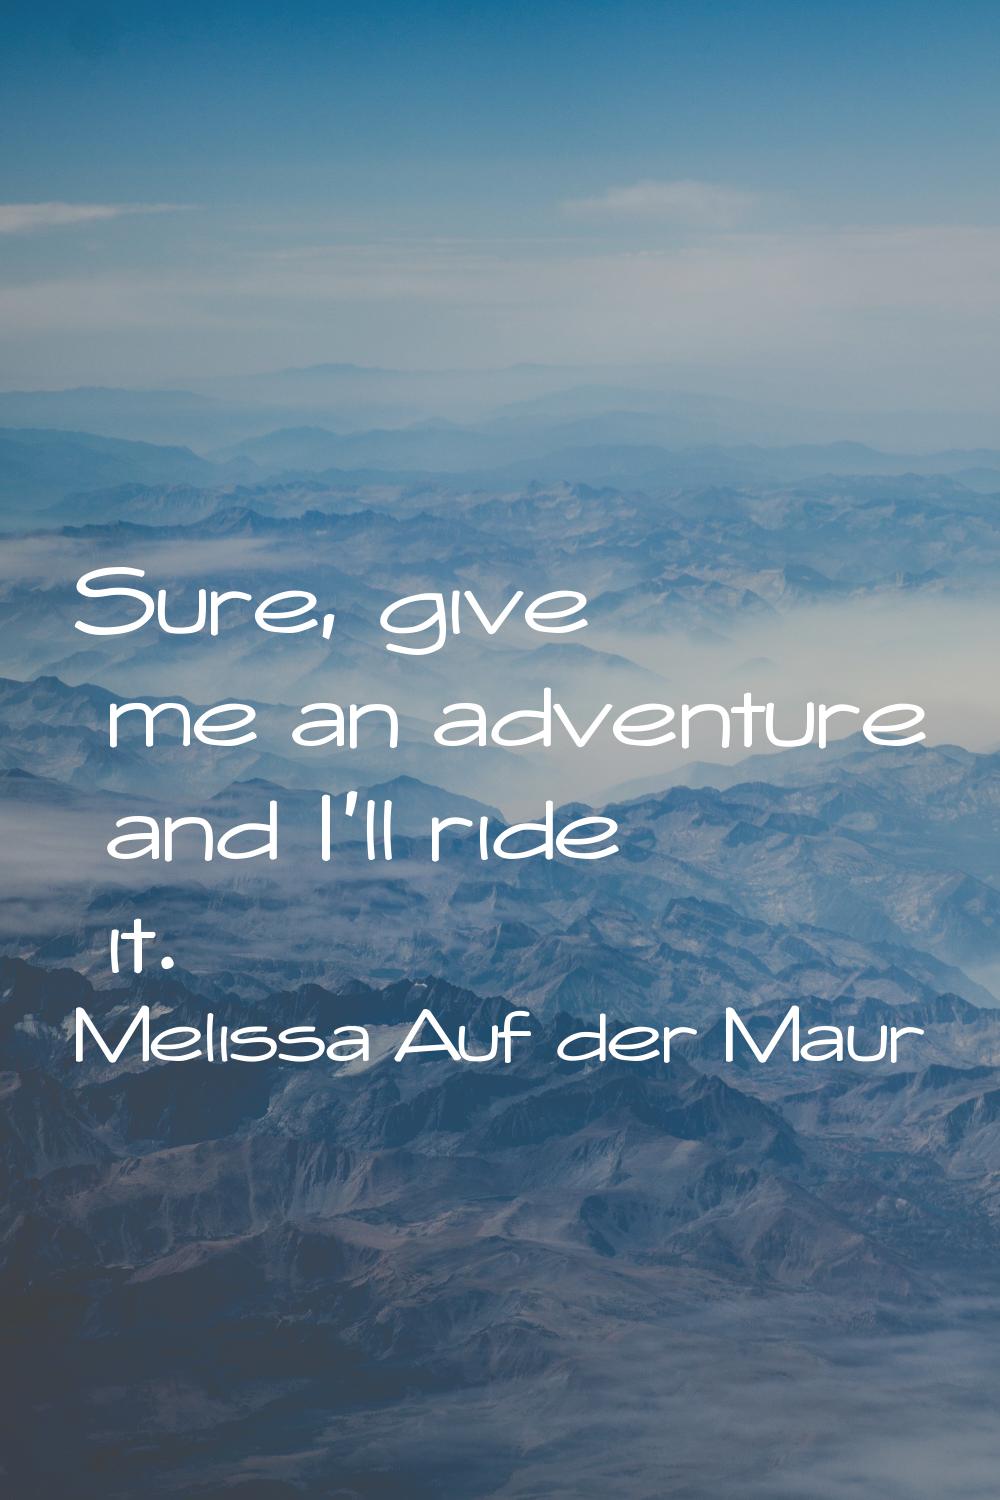 Sure, give me an adventure and I'll ride it.